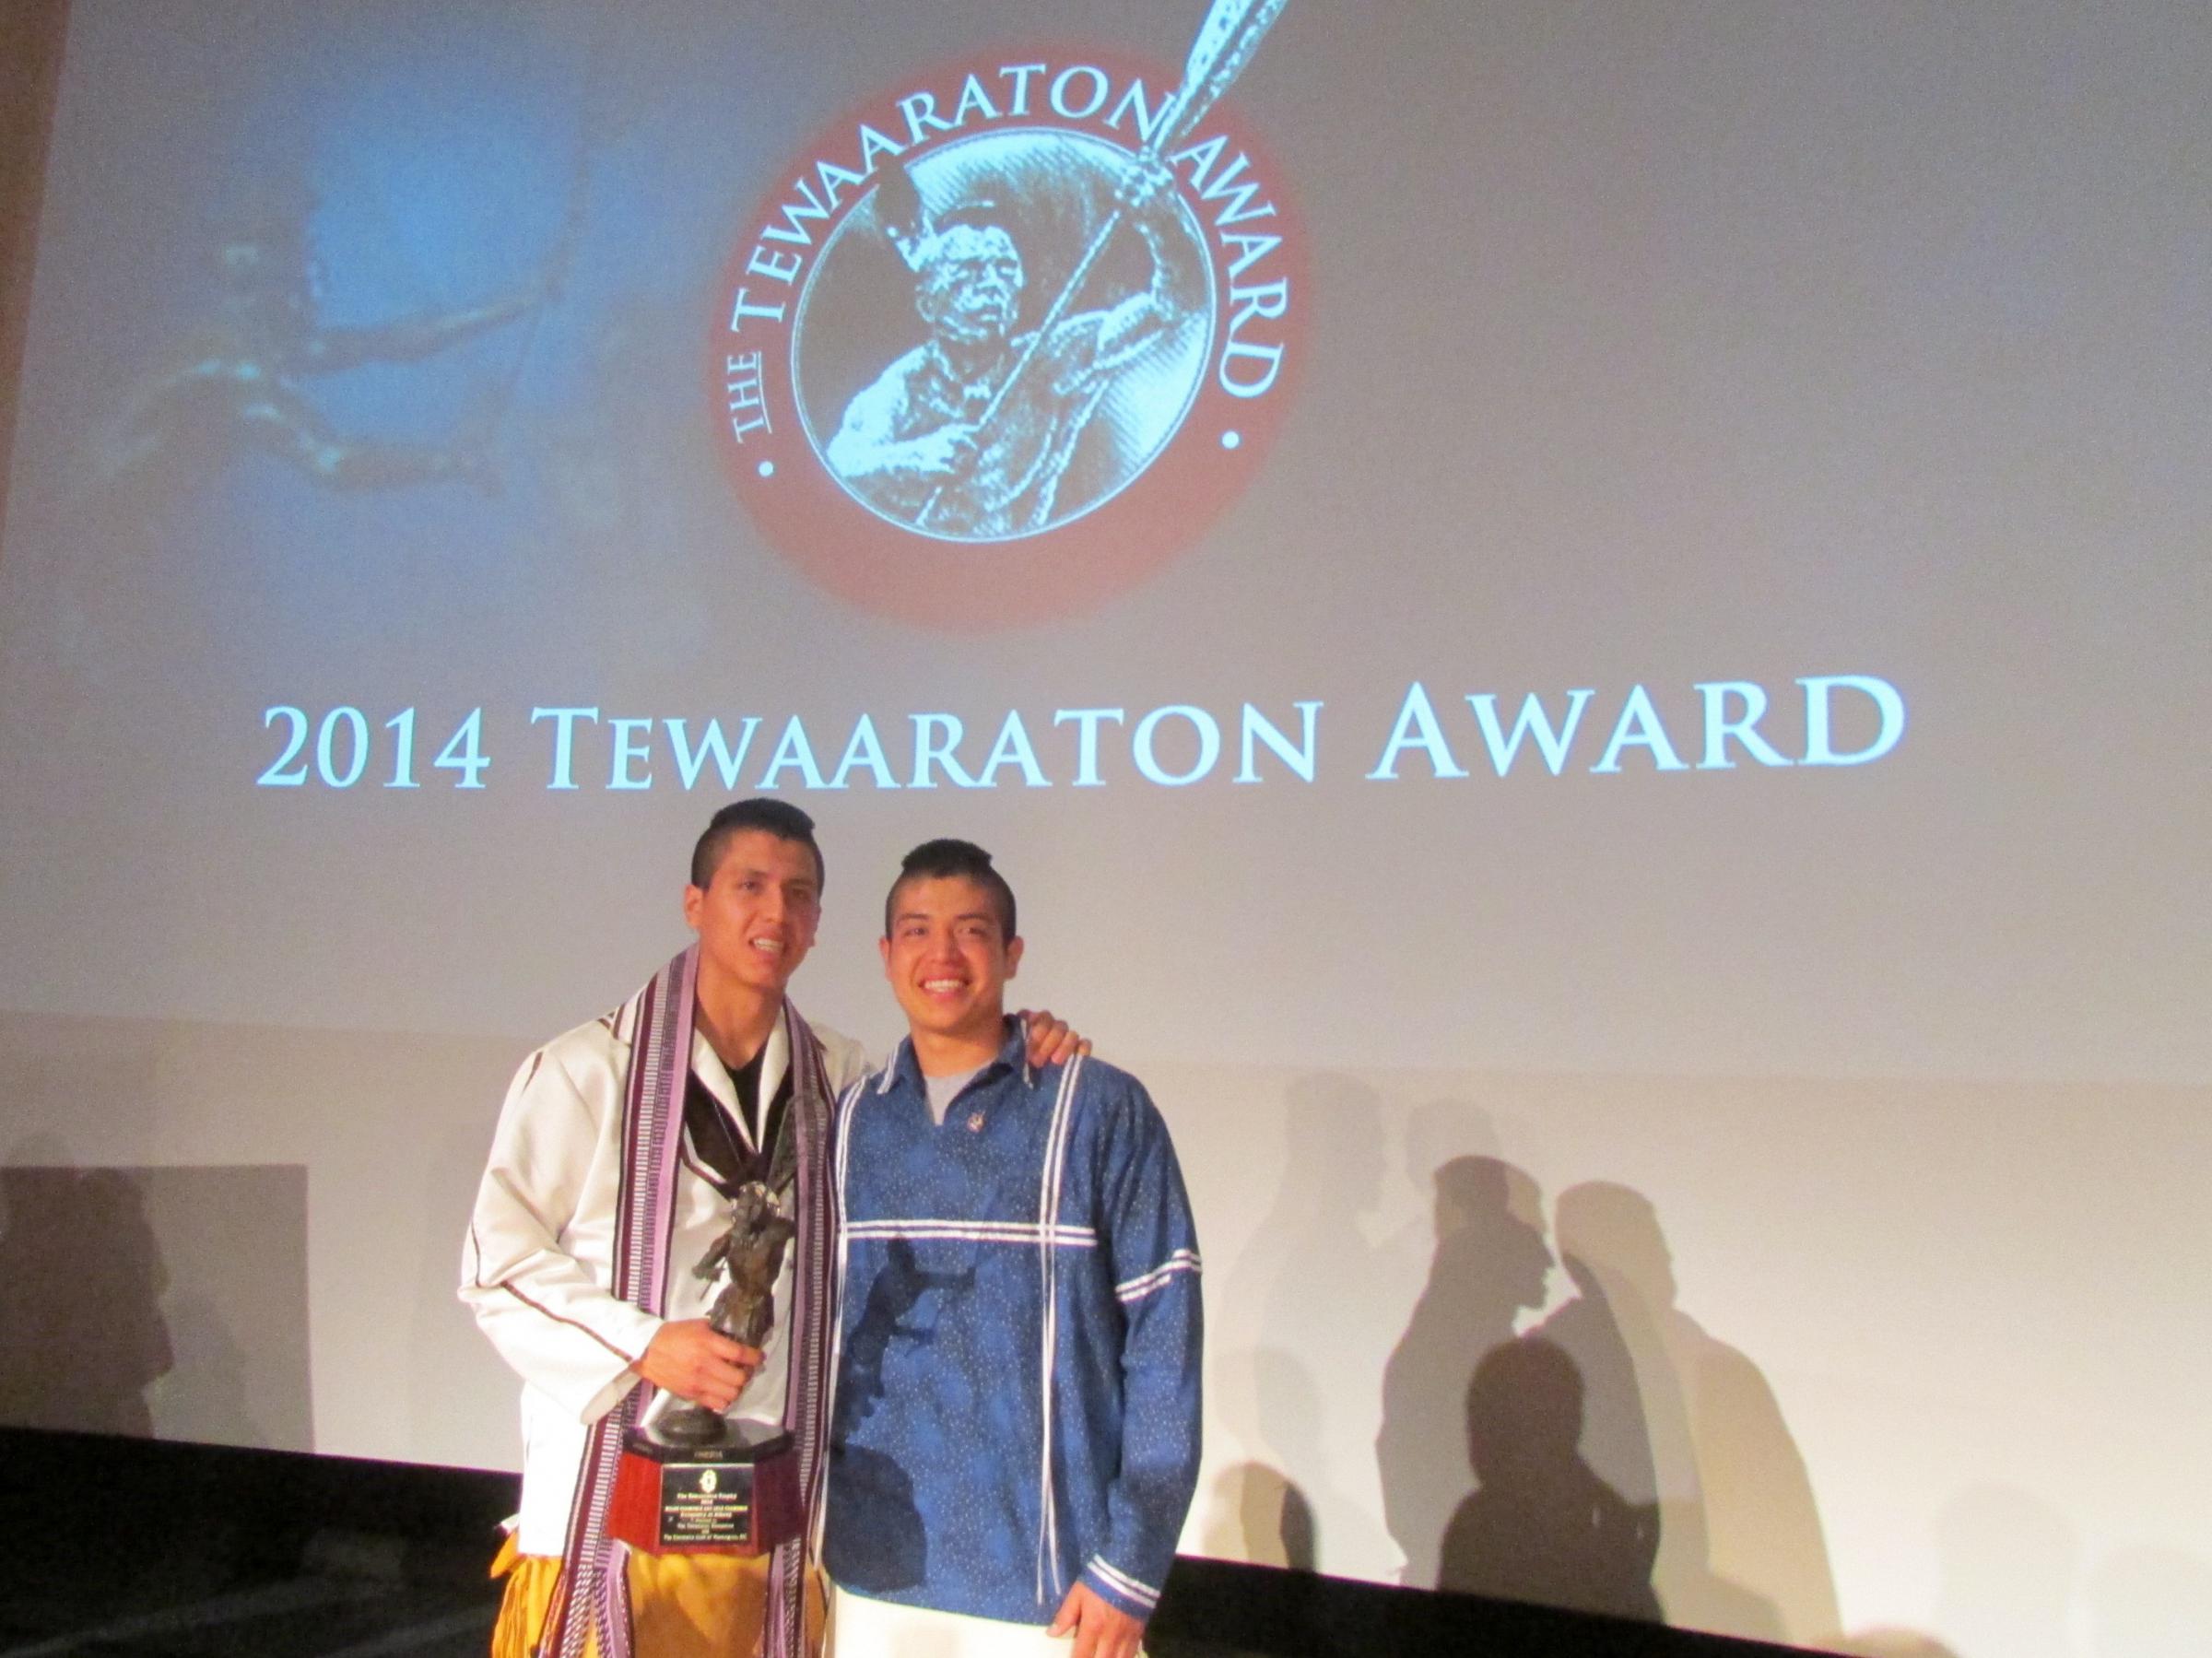 In Historic First, Native American Brothers Win Lacrosse Trophy KUOW